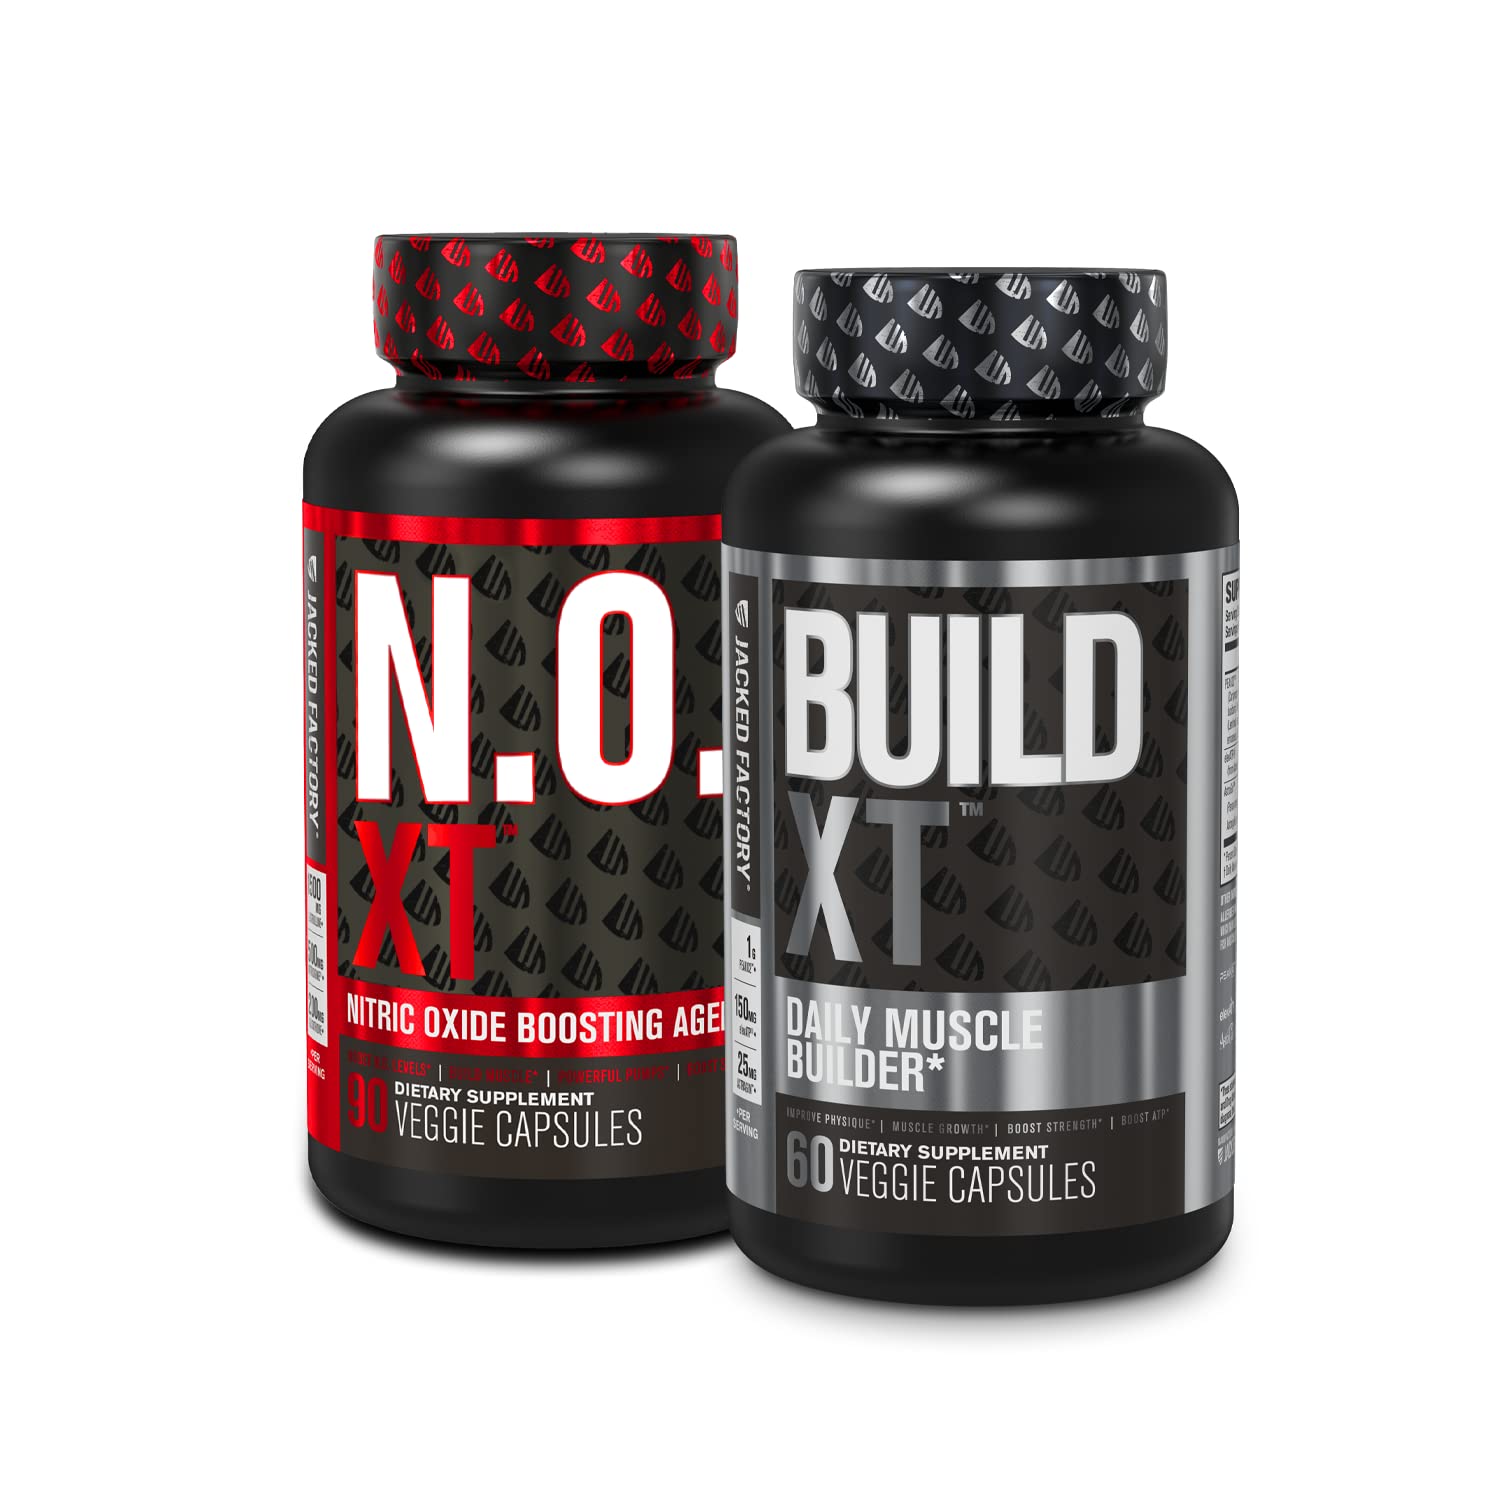 Jacked Factory Nitric Oxide Supplement & Muscle Builder Stack - 1 Month Supply